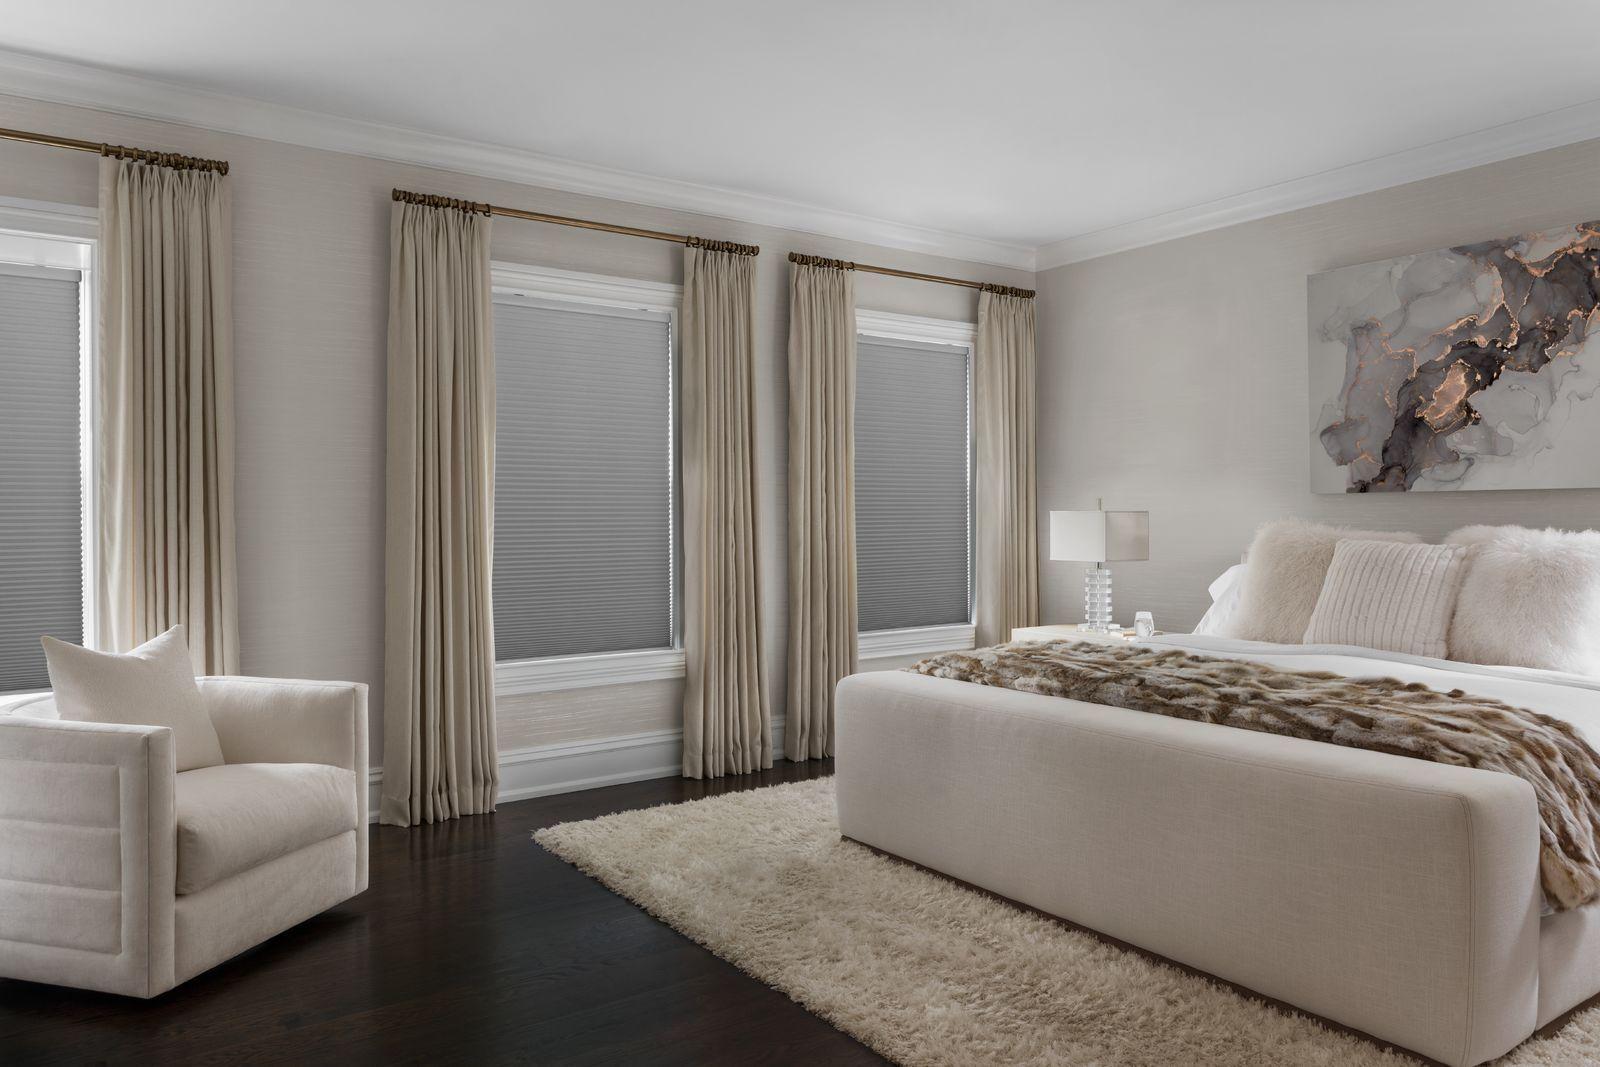 The bedroom has three large windows with drapery and energy-efficient cellular blinds with blackout filters.